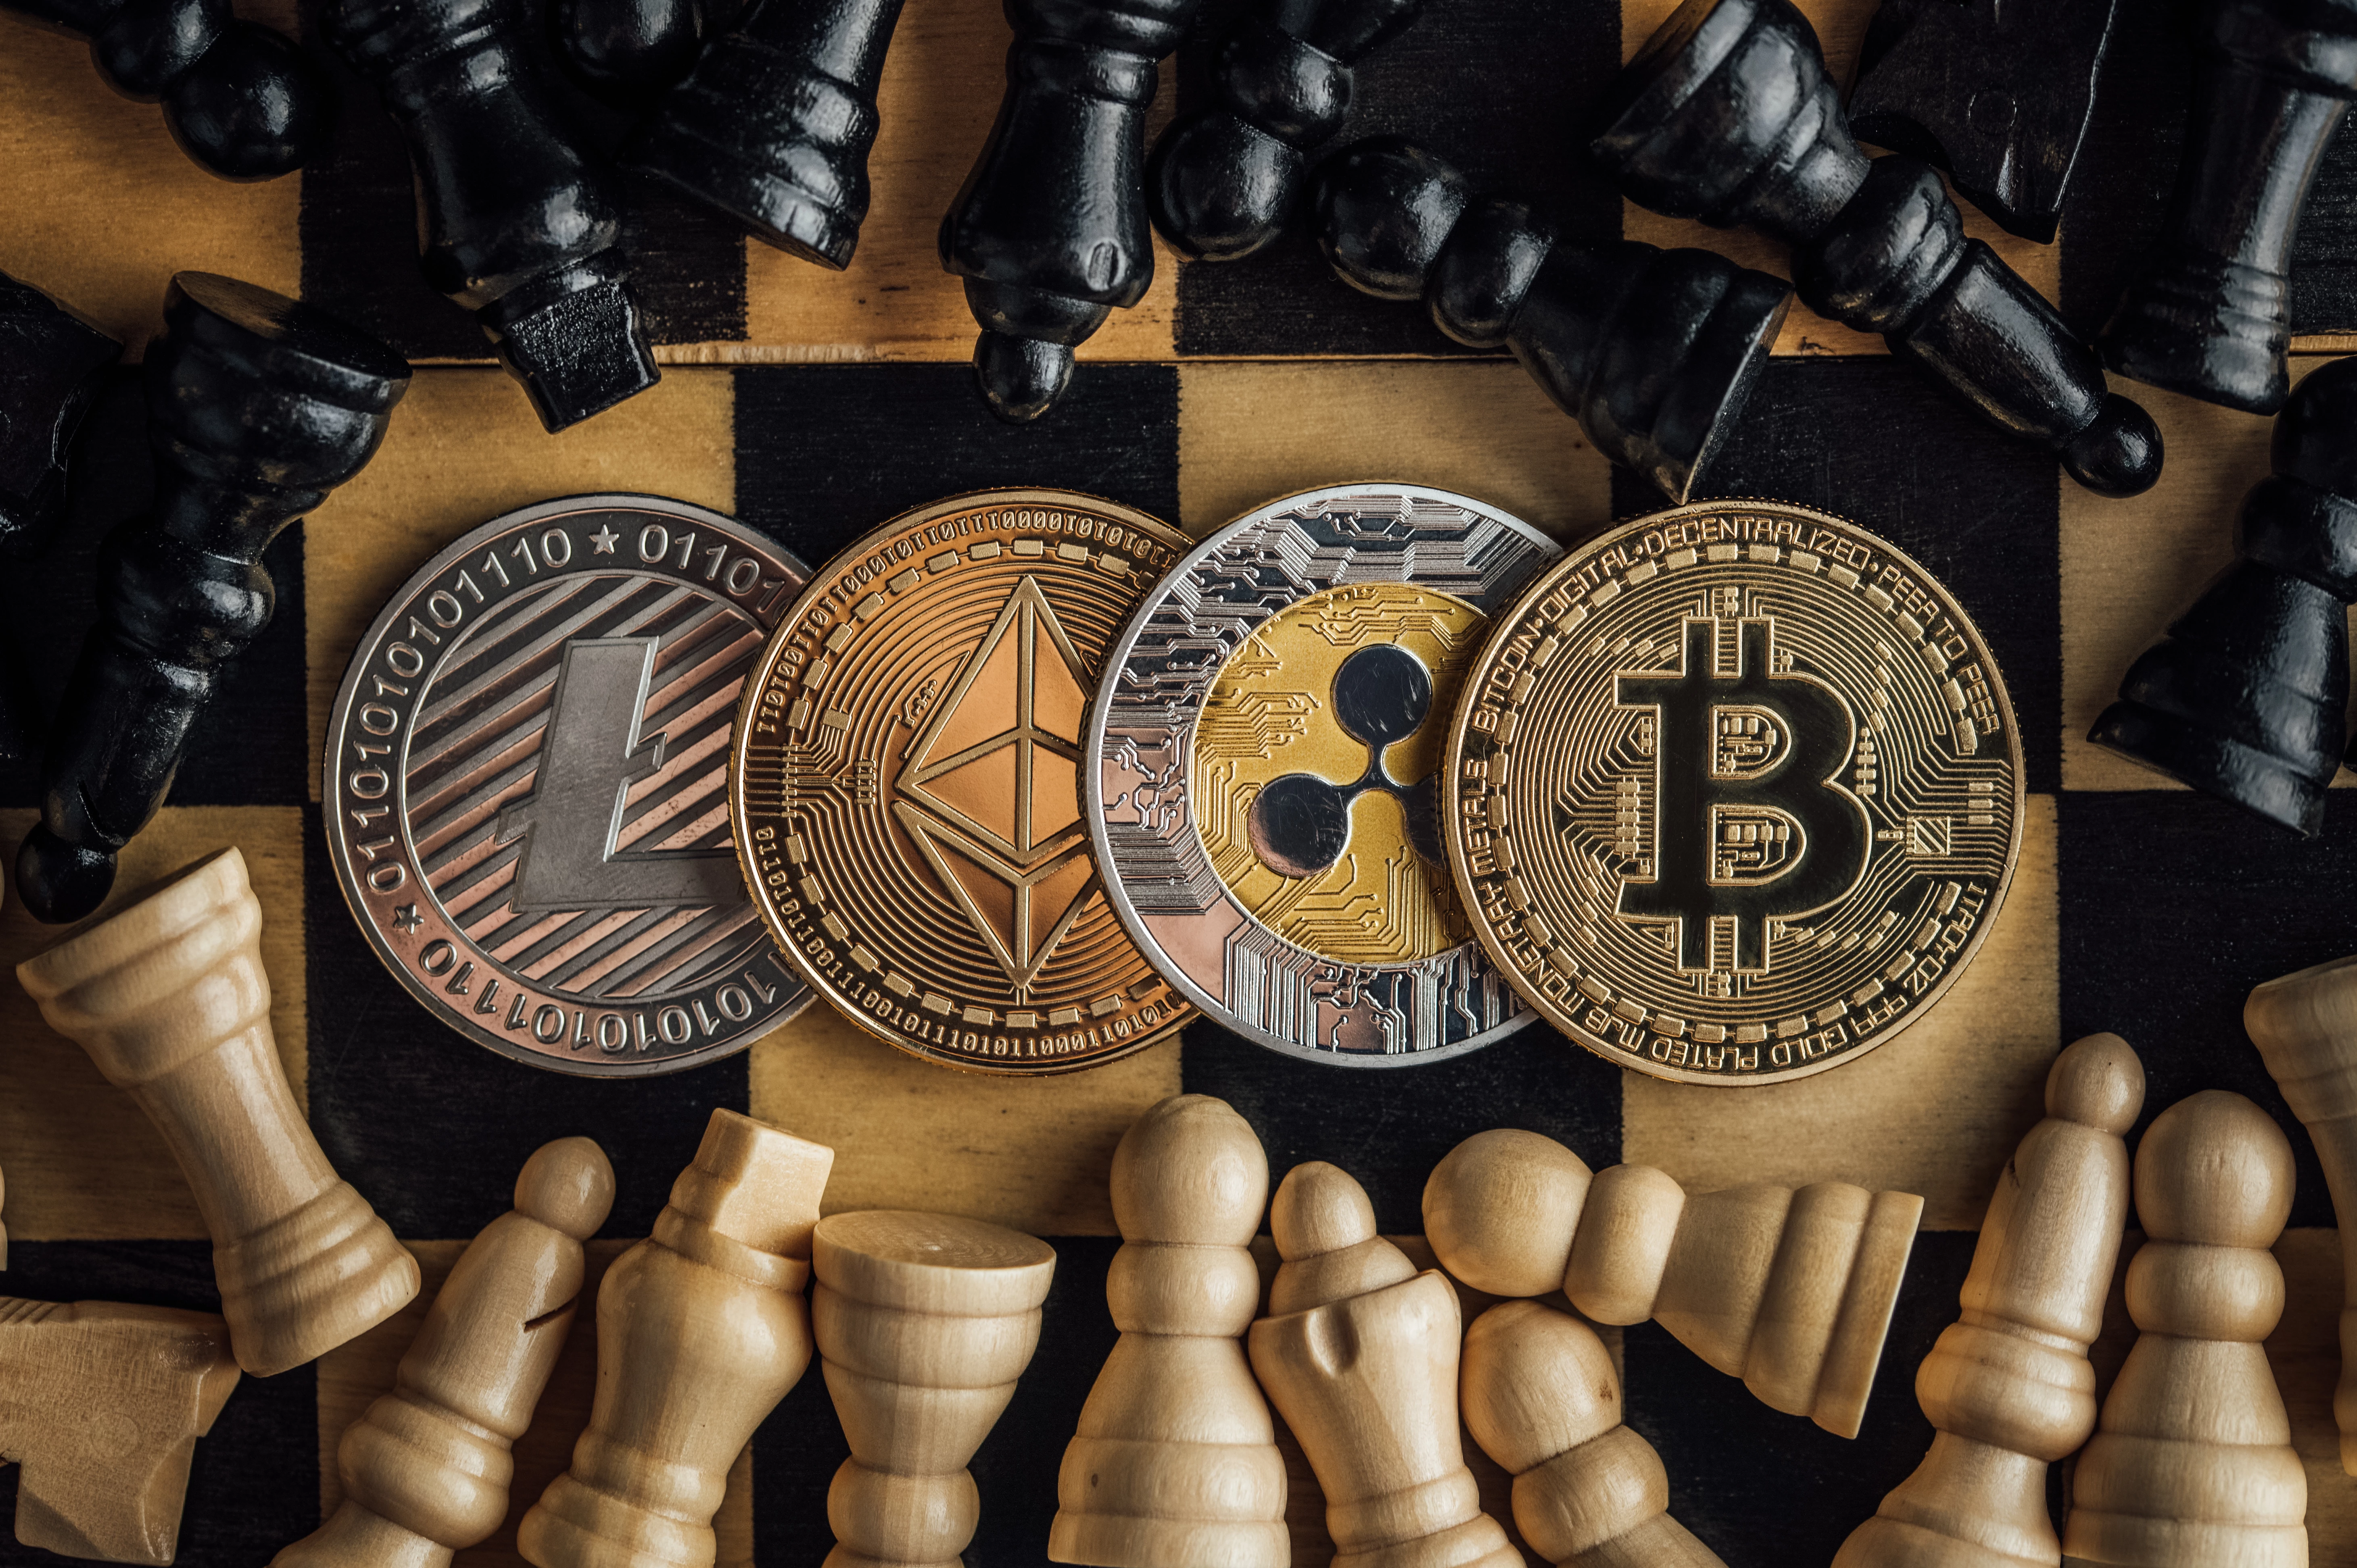 Bird's eye view of the physical crypto currency coins surrounded by chess pieces